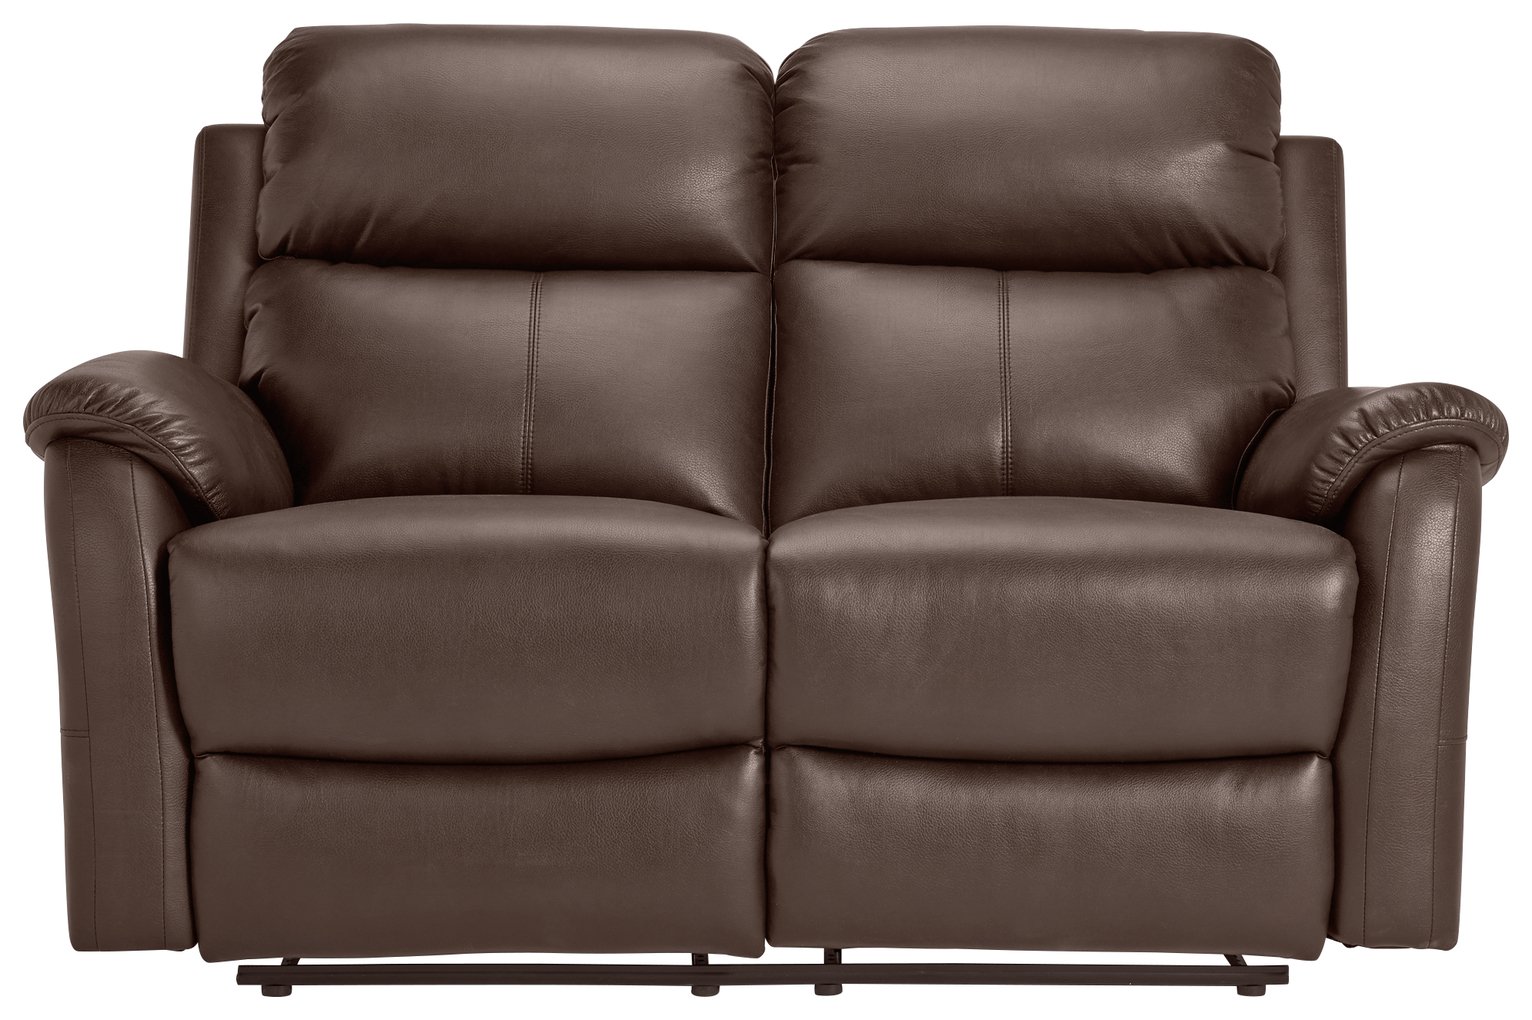 Argos Home Tyler 2 Seater Leather Recliner Sofa - Chocolate